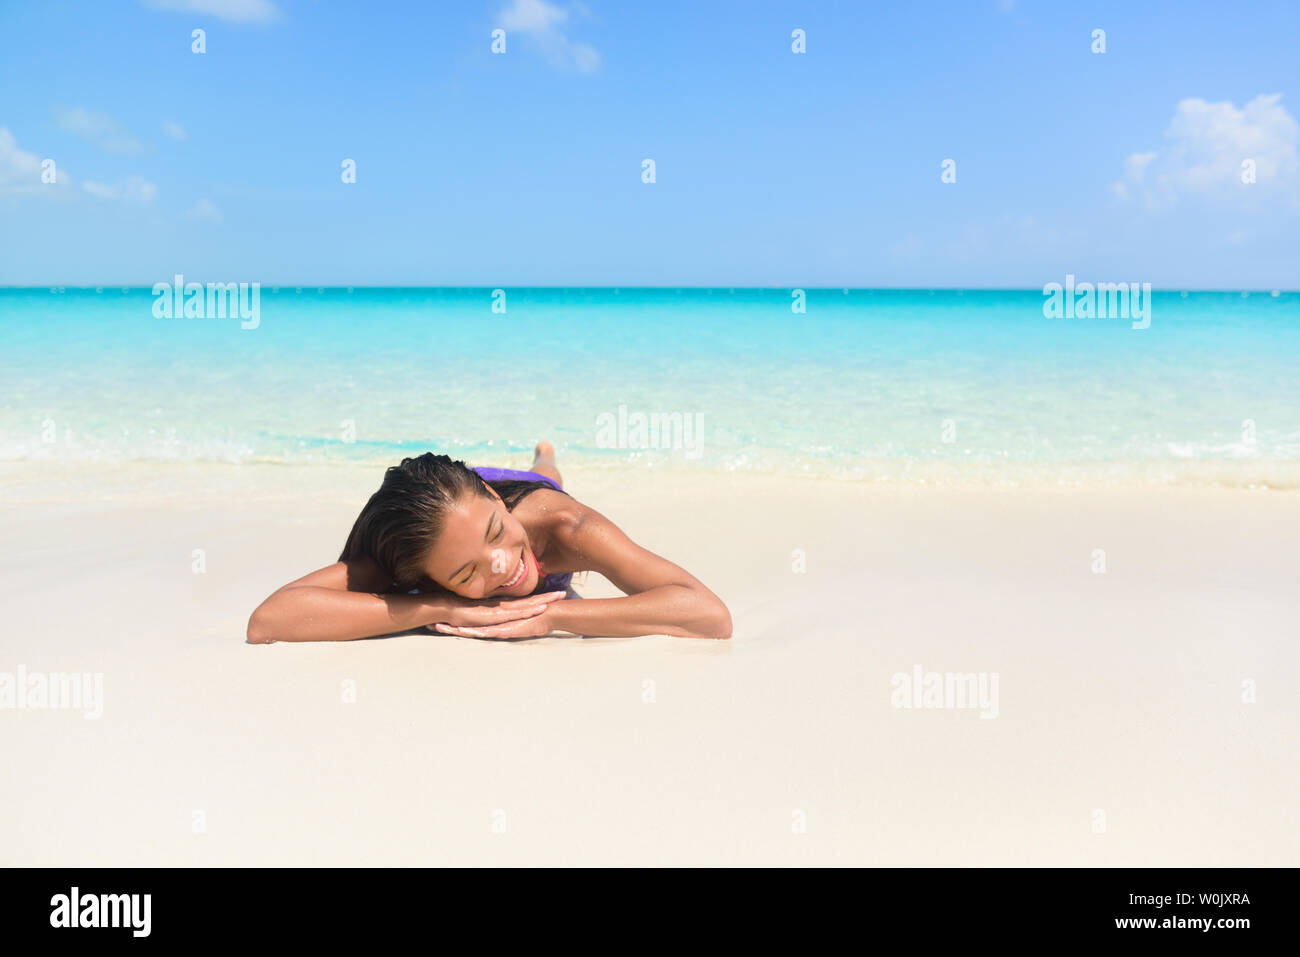 Relaxing Woman On Beach Vacation Sleeping On Sand Beautiful Girl Lying Down Under The Sun